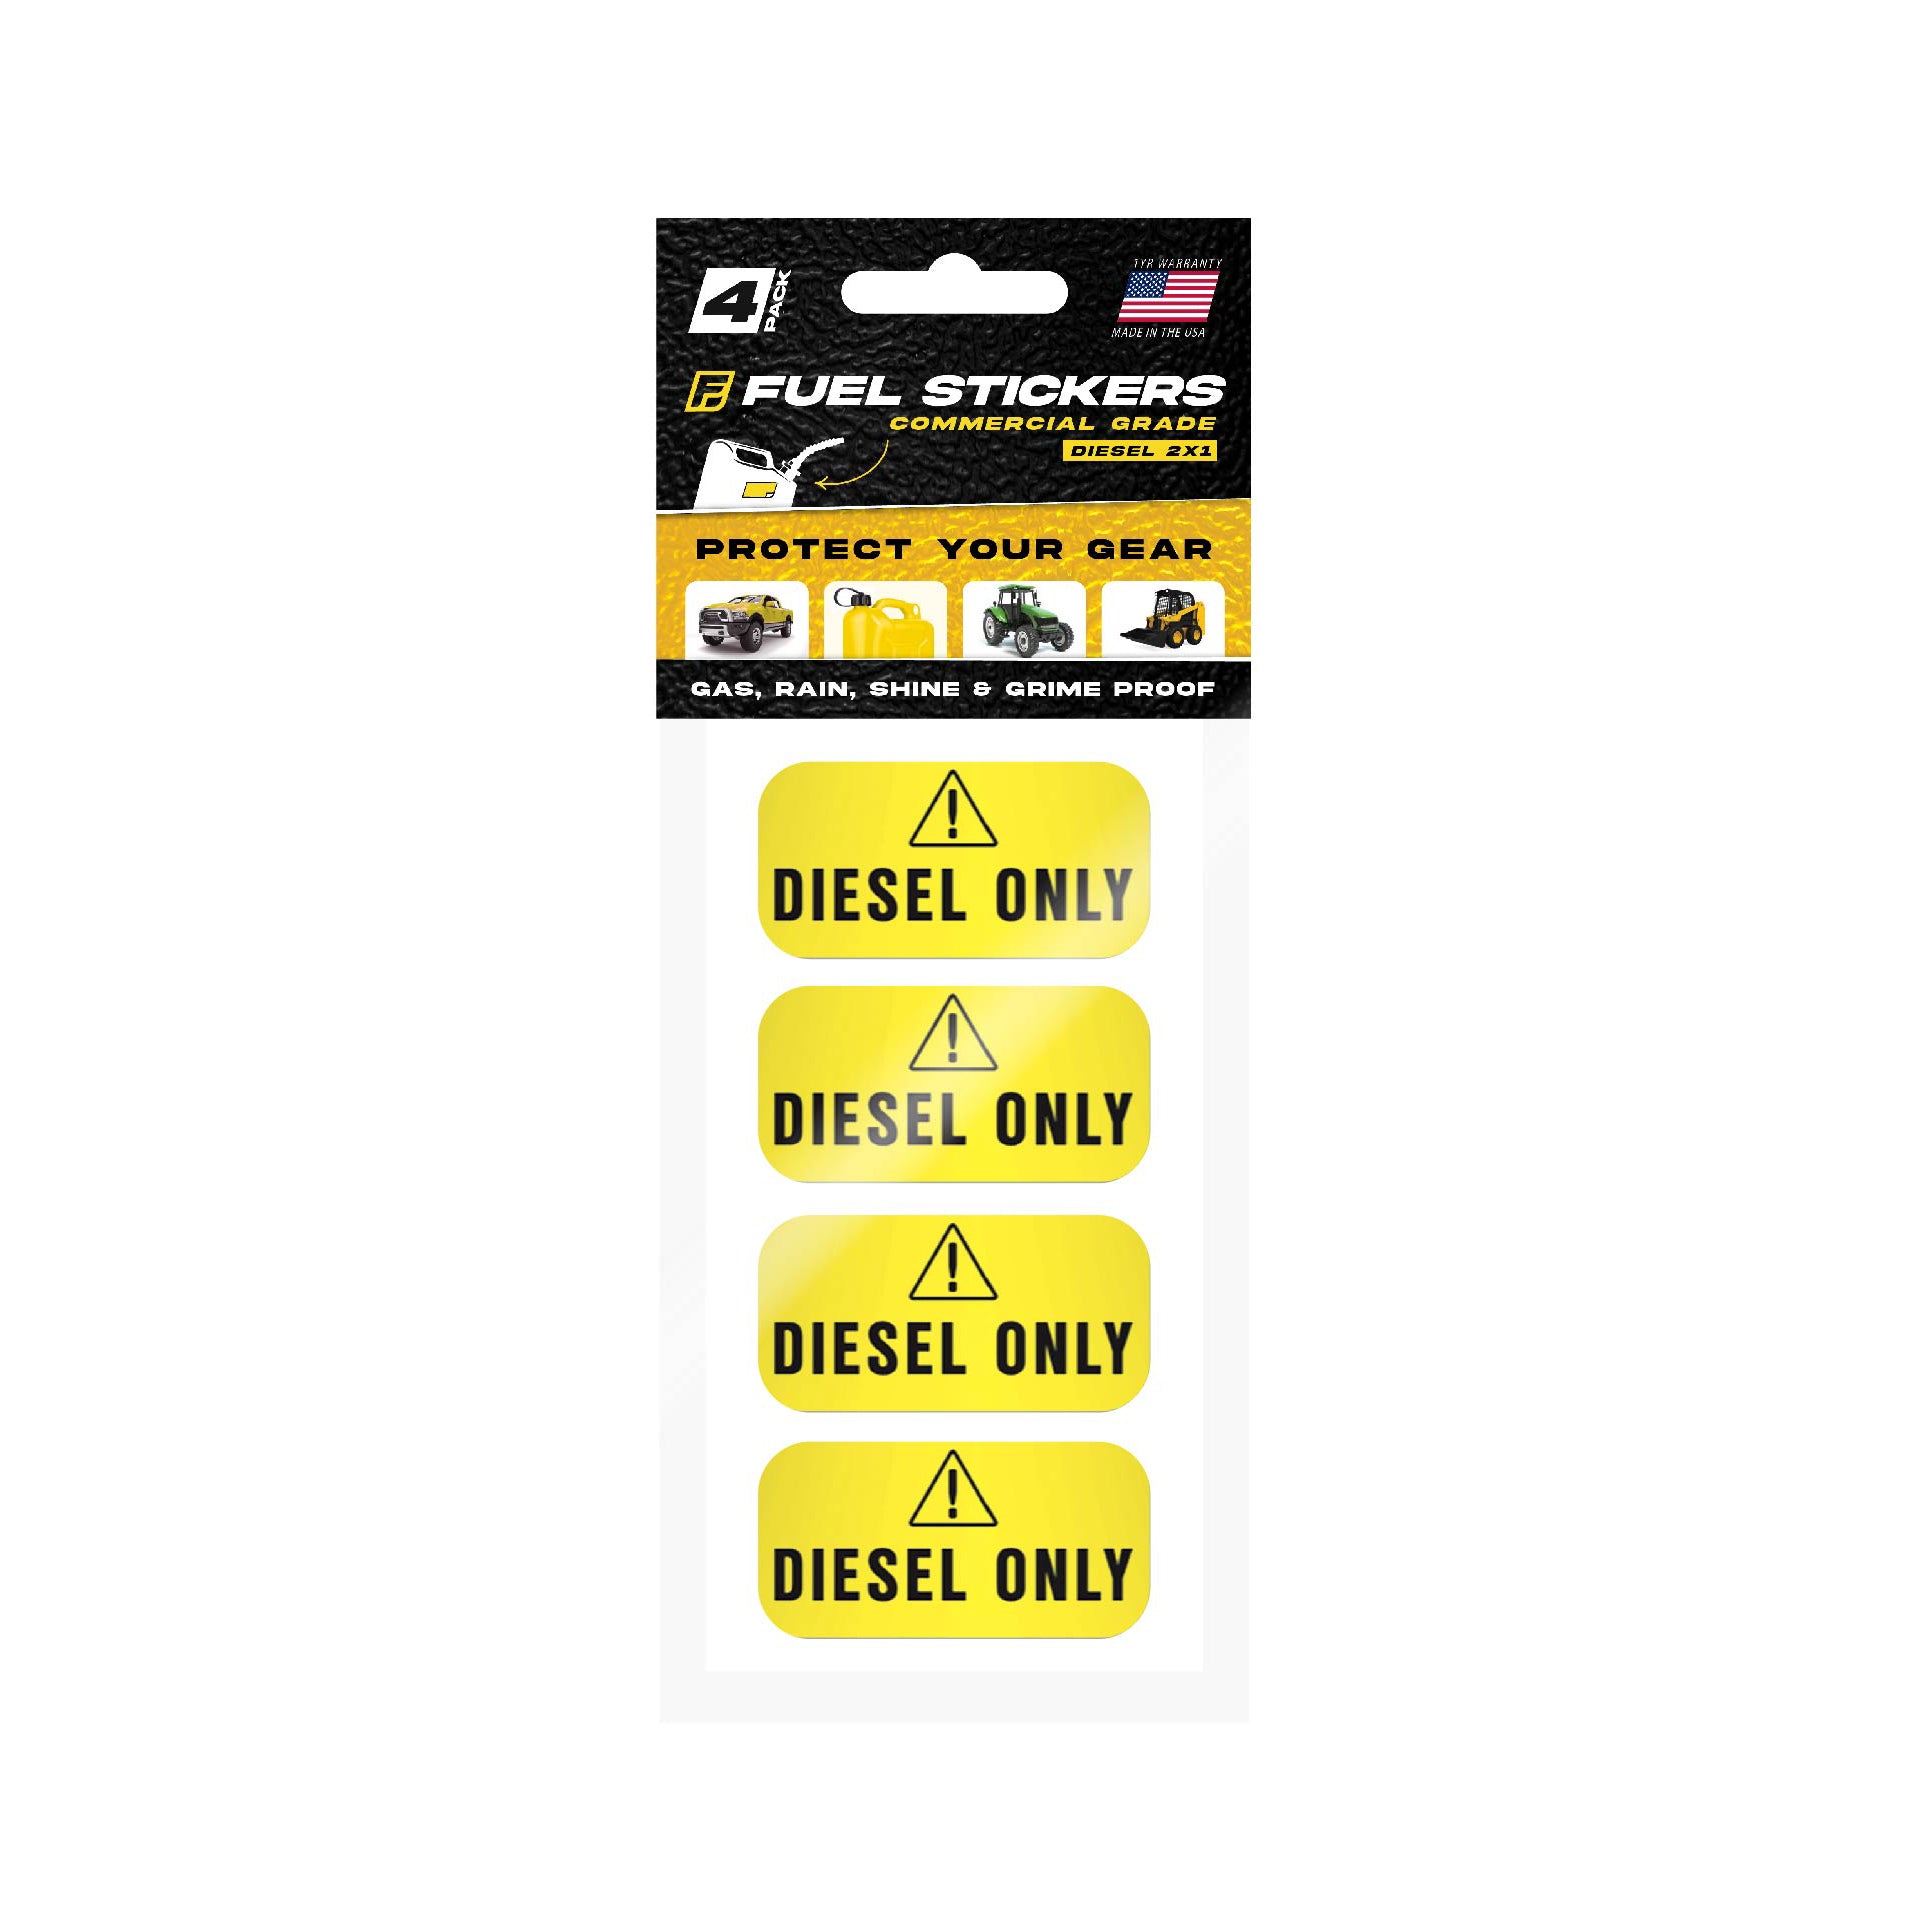 Diesel Only Sticker Yellow Labels for Tractors Construction and He